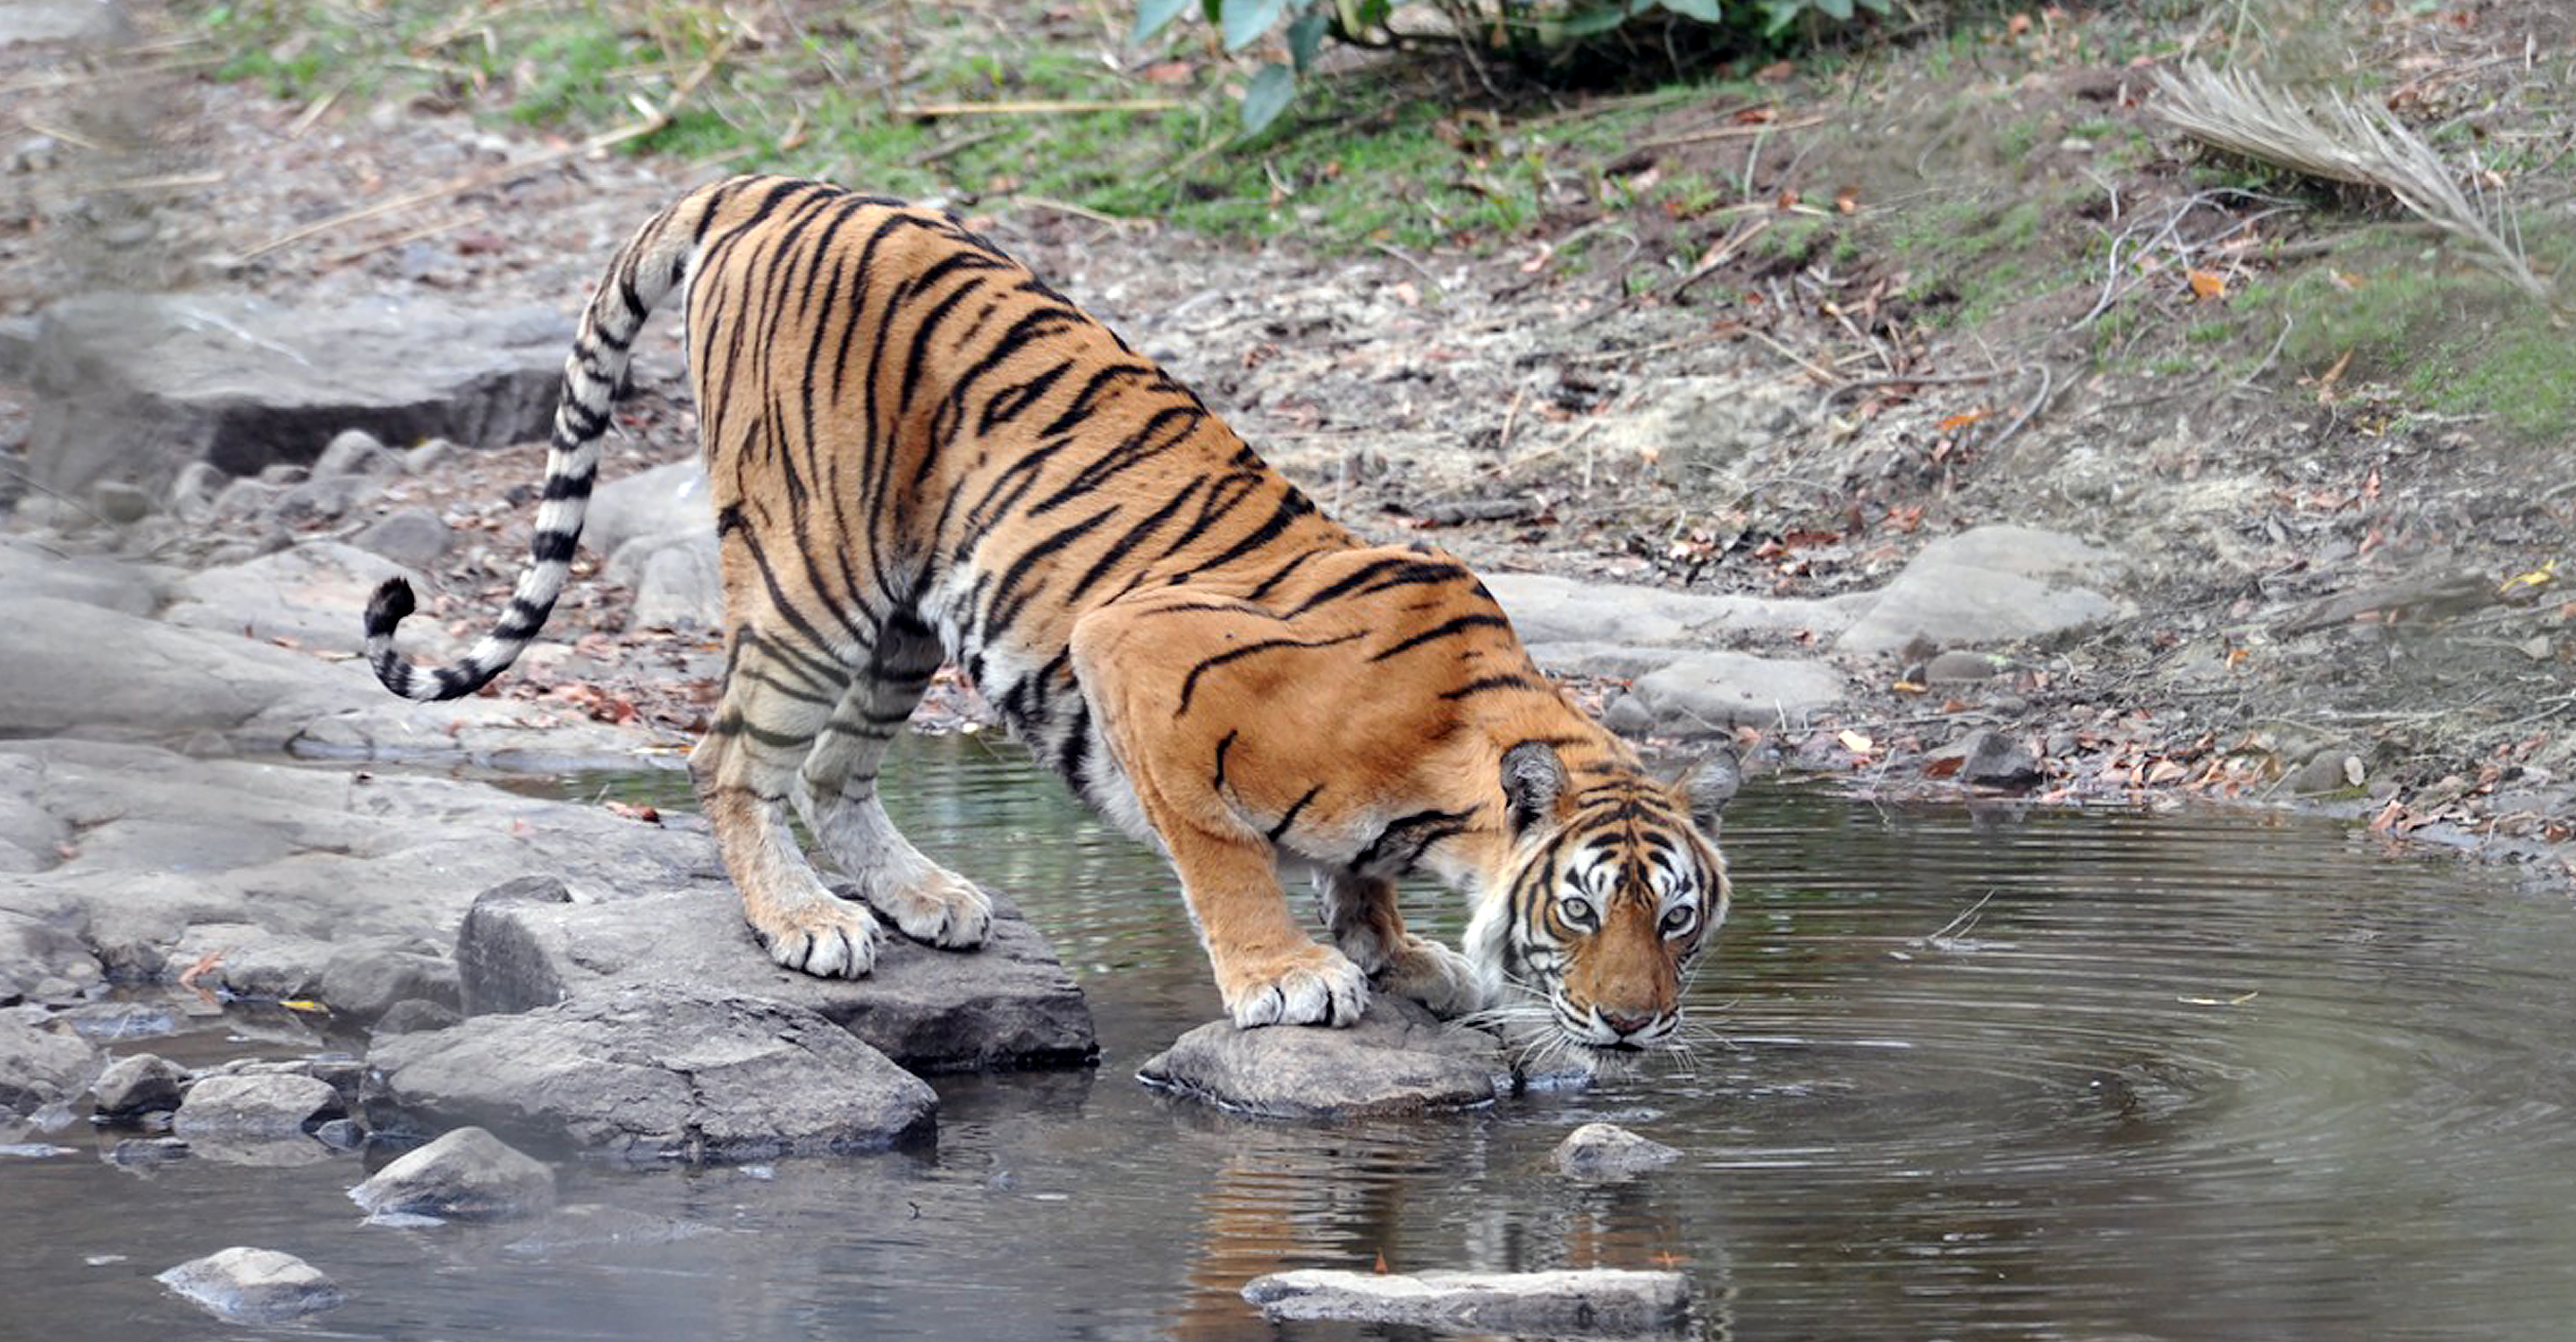 A tiger take a drink from a waterhole in Ranthambore National Park, India